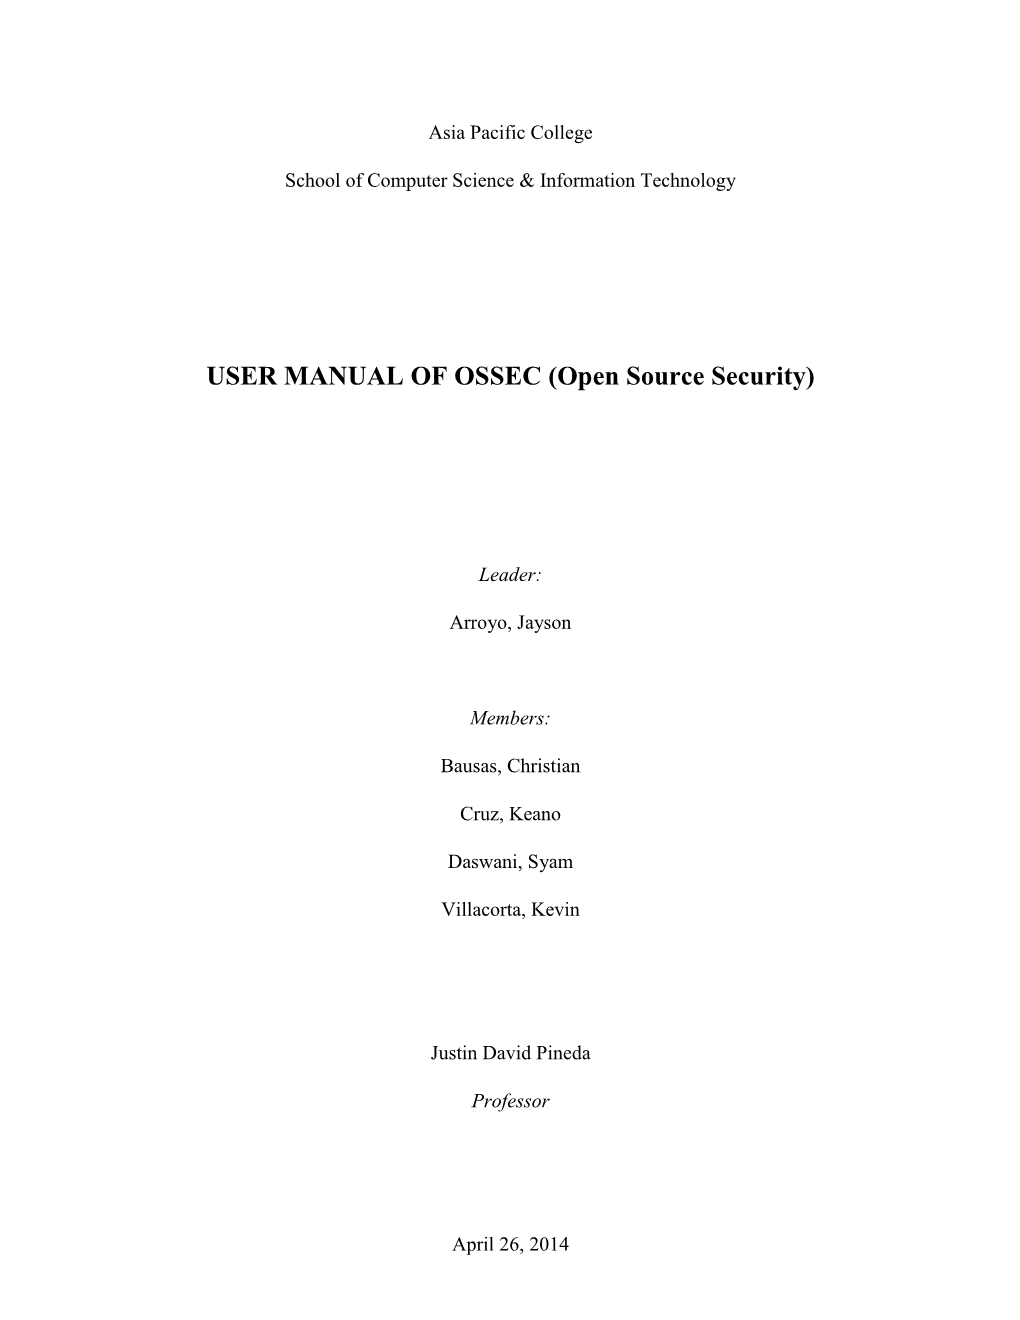 USER MANUAL of OSSEC (Open Source Security)